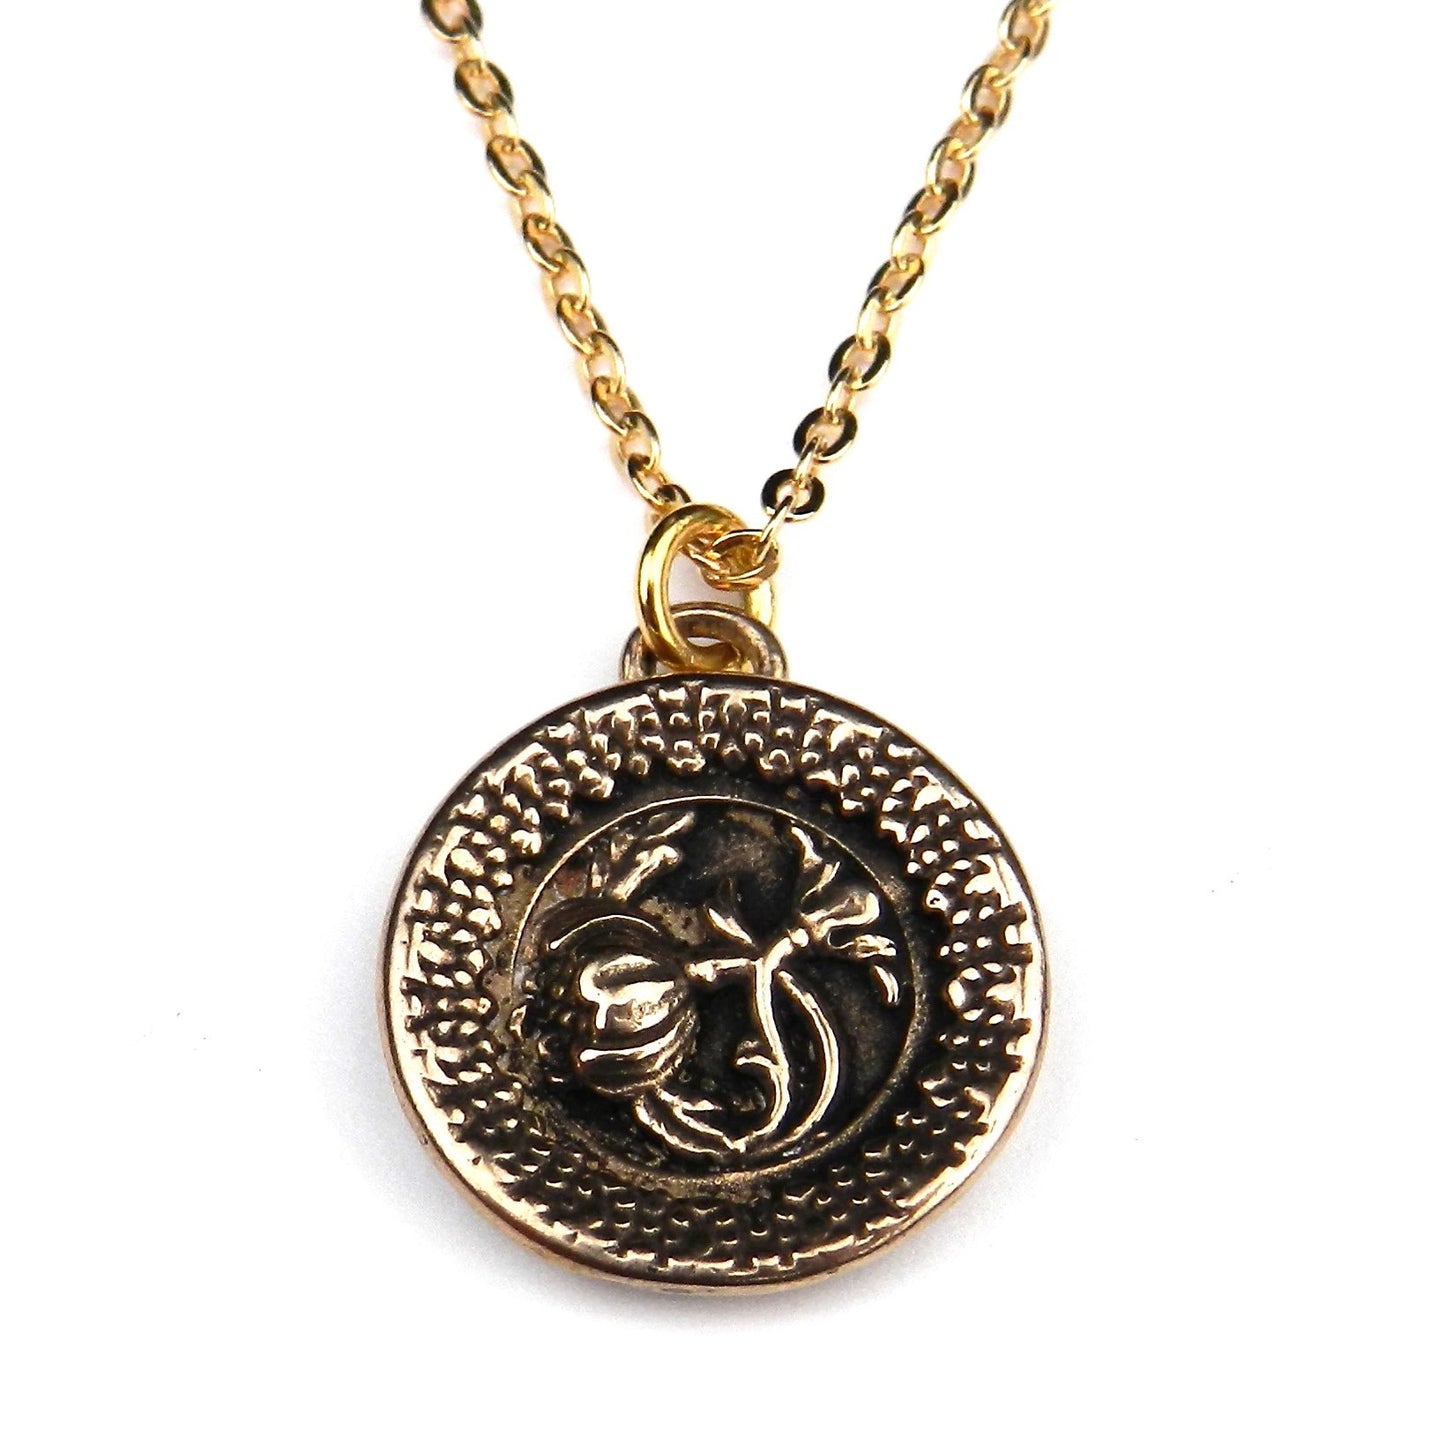 VICTORIAN ROSE Necklace - GOLD – Compass Rose Design Jewelry